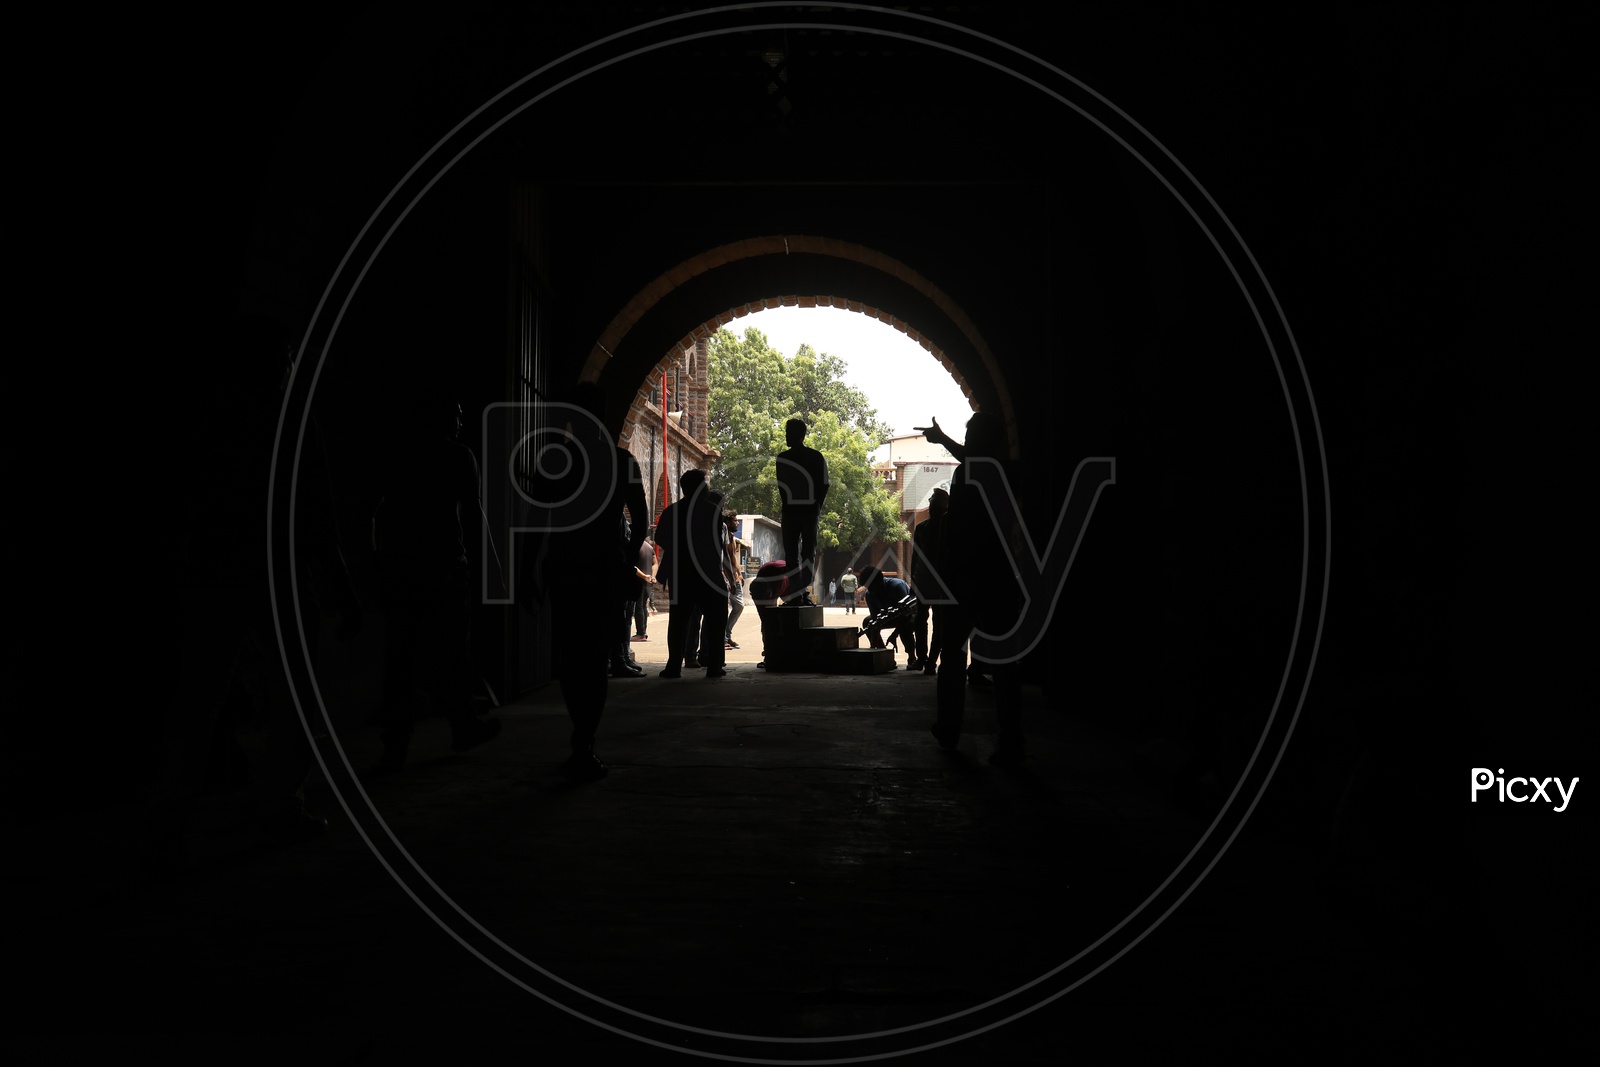 Silhouette Of People In a Corridor